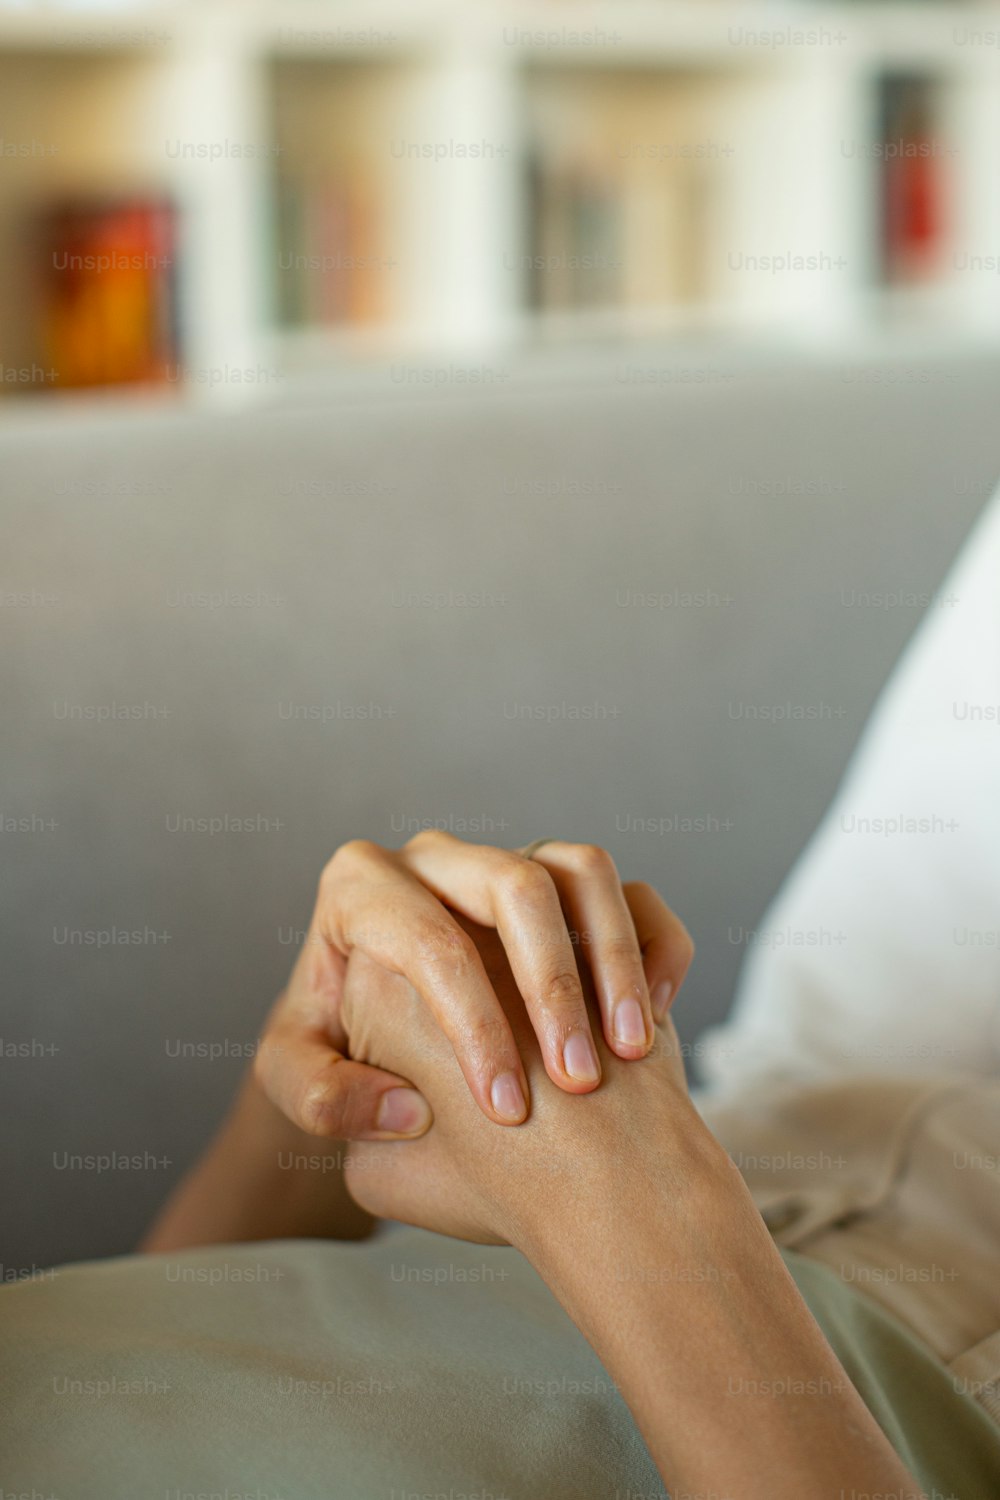 a person laying on a couch with their hand resting on the pillow